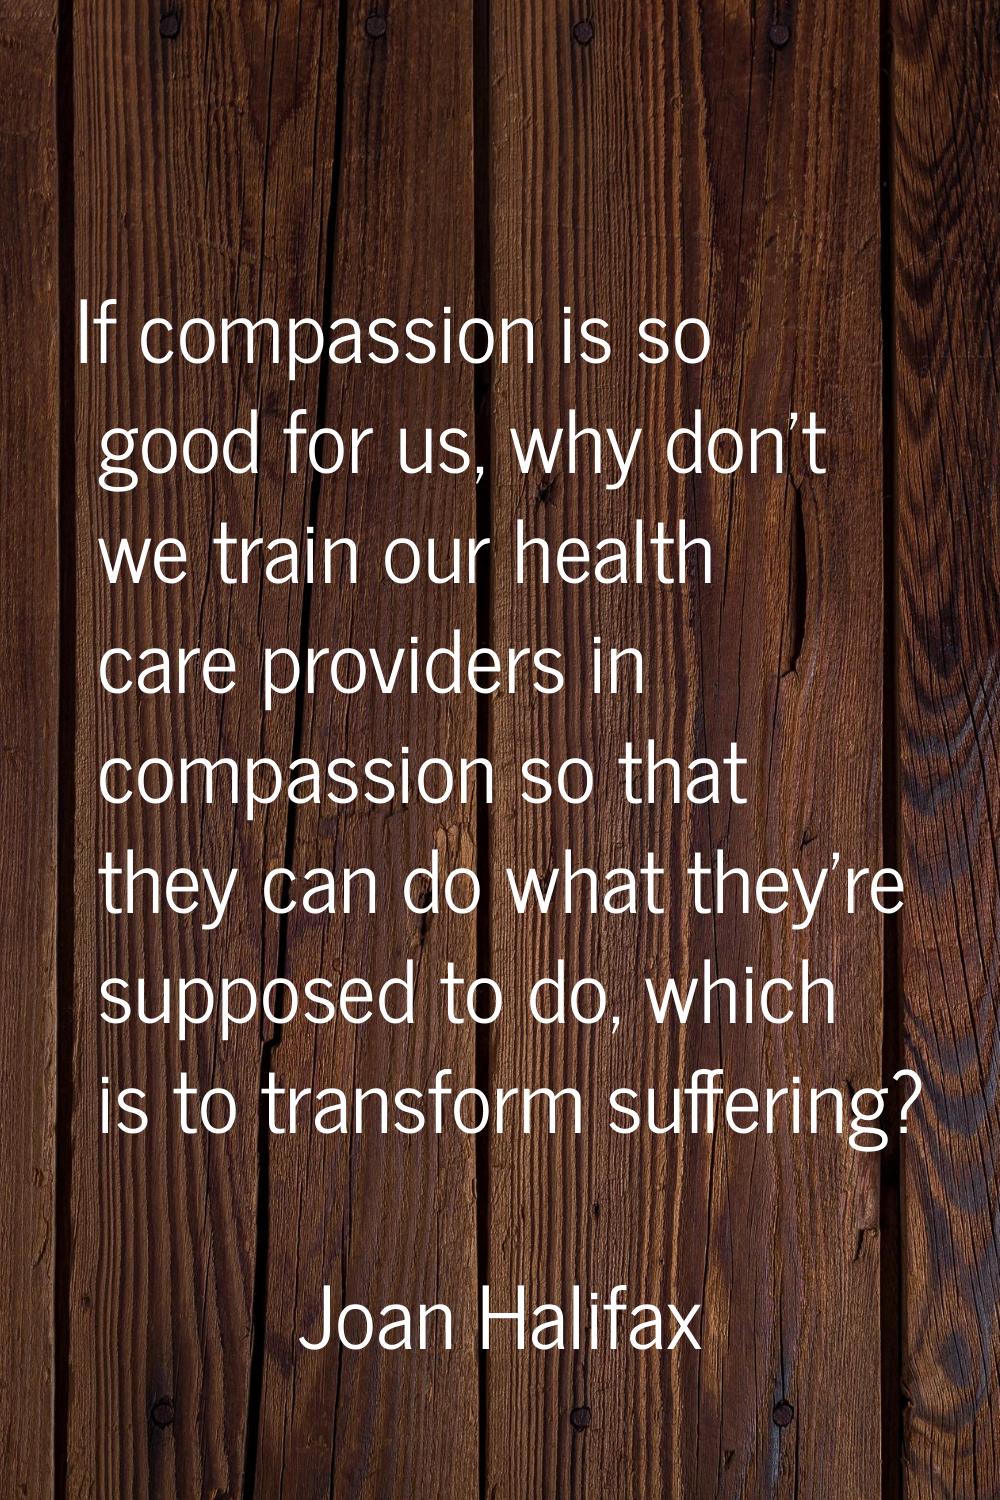 If compassion is so good for us, why don't we train our health care providers in compassion so that